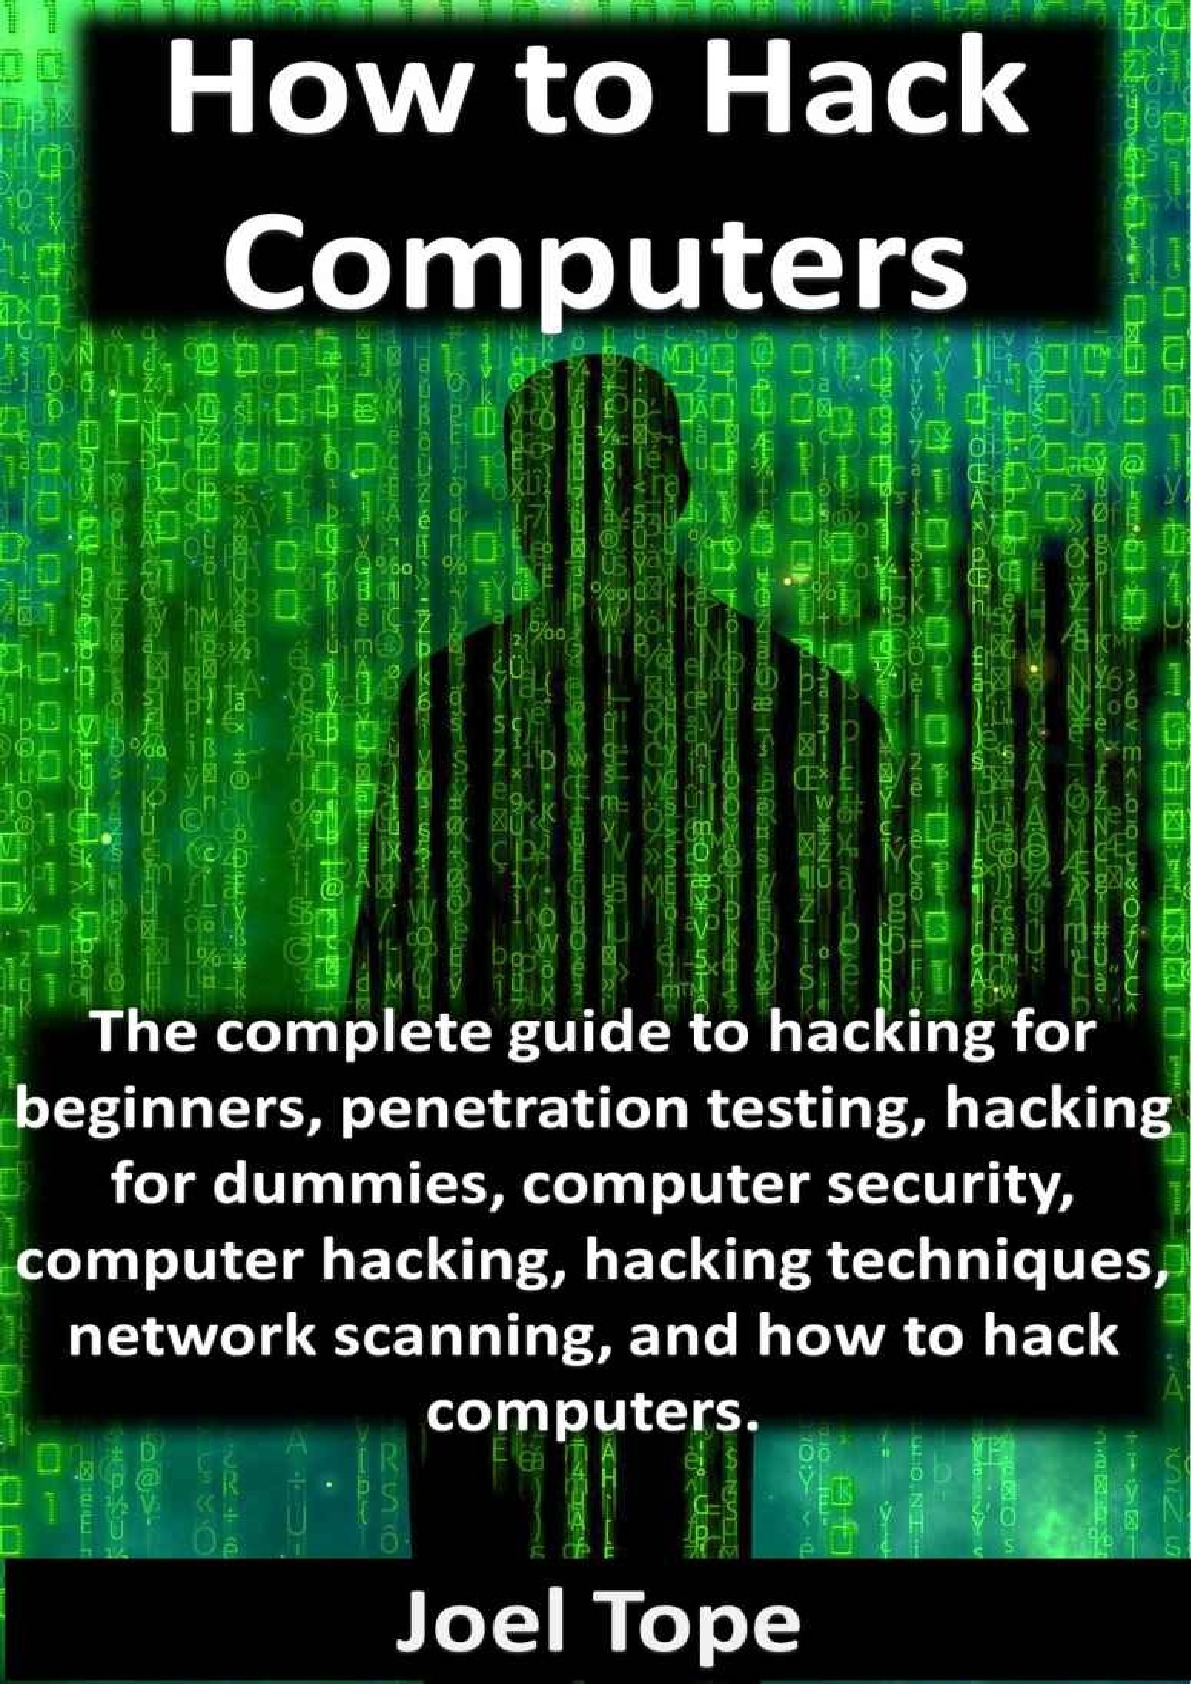 How to Hack Computers_ how to h – Joel Tope